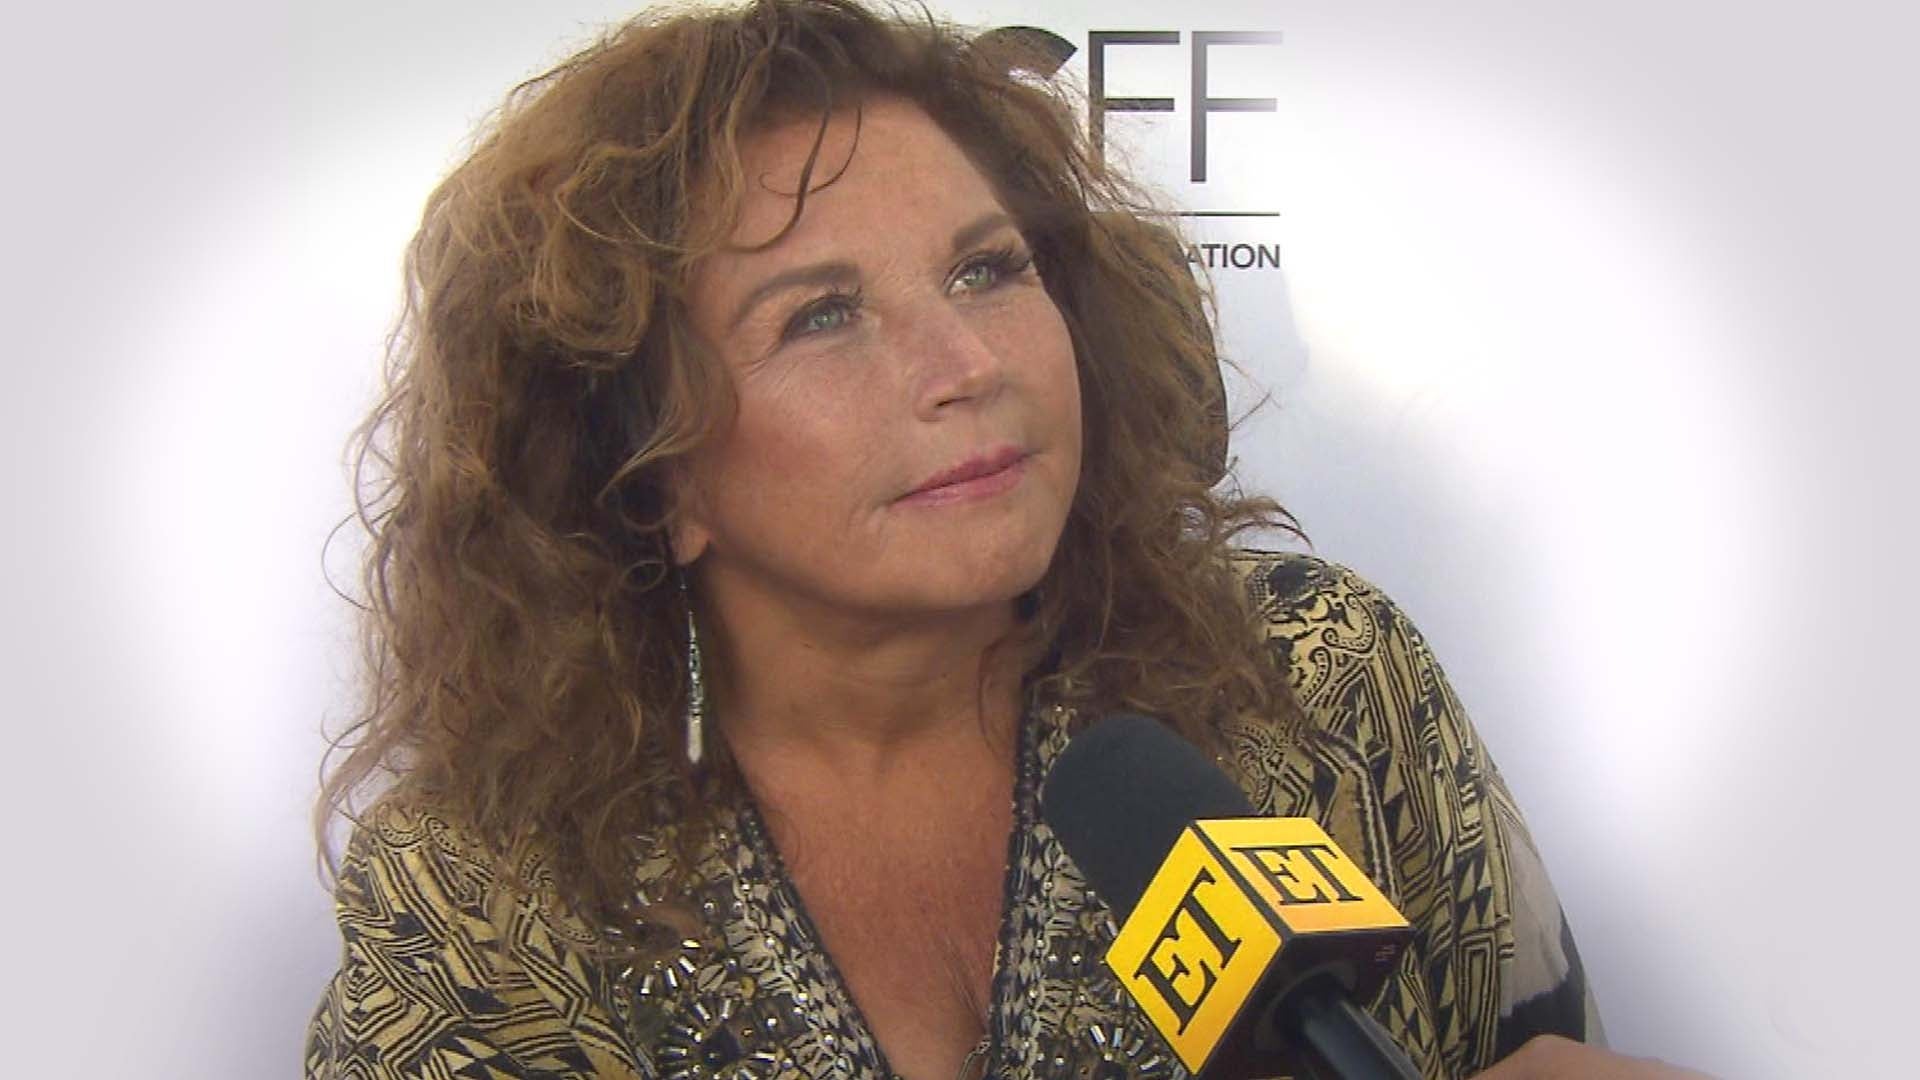 Dance Moms' Star Abby Lee Miller Shares Health Update (Exclusive)